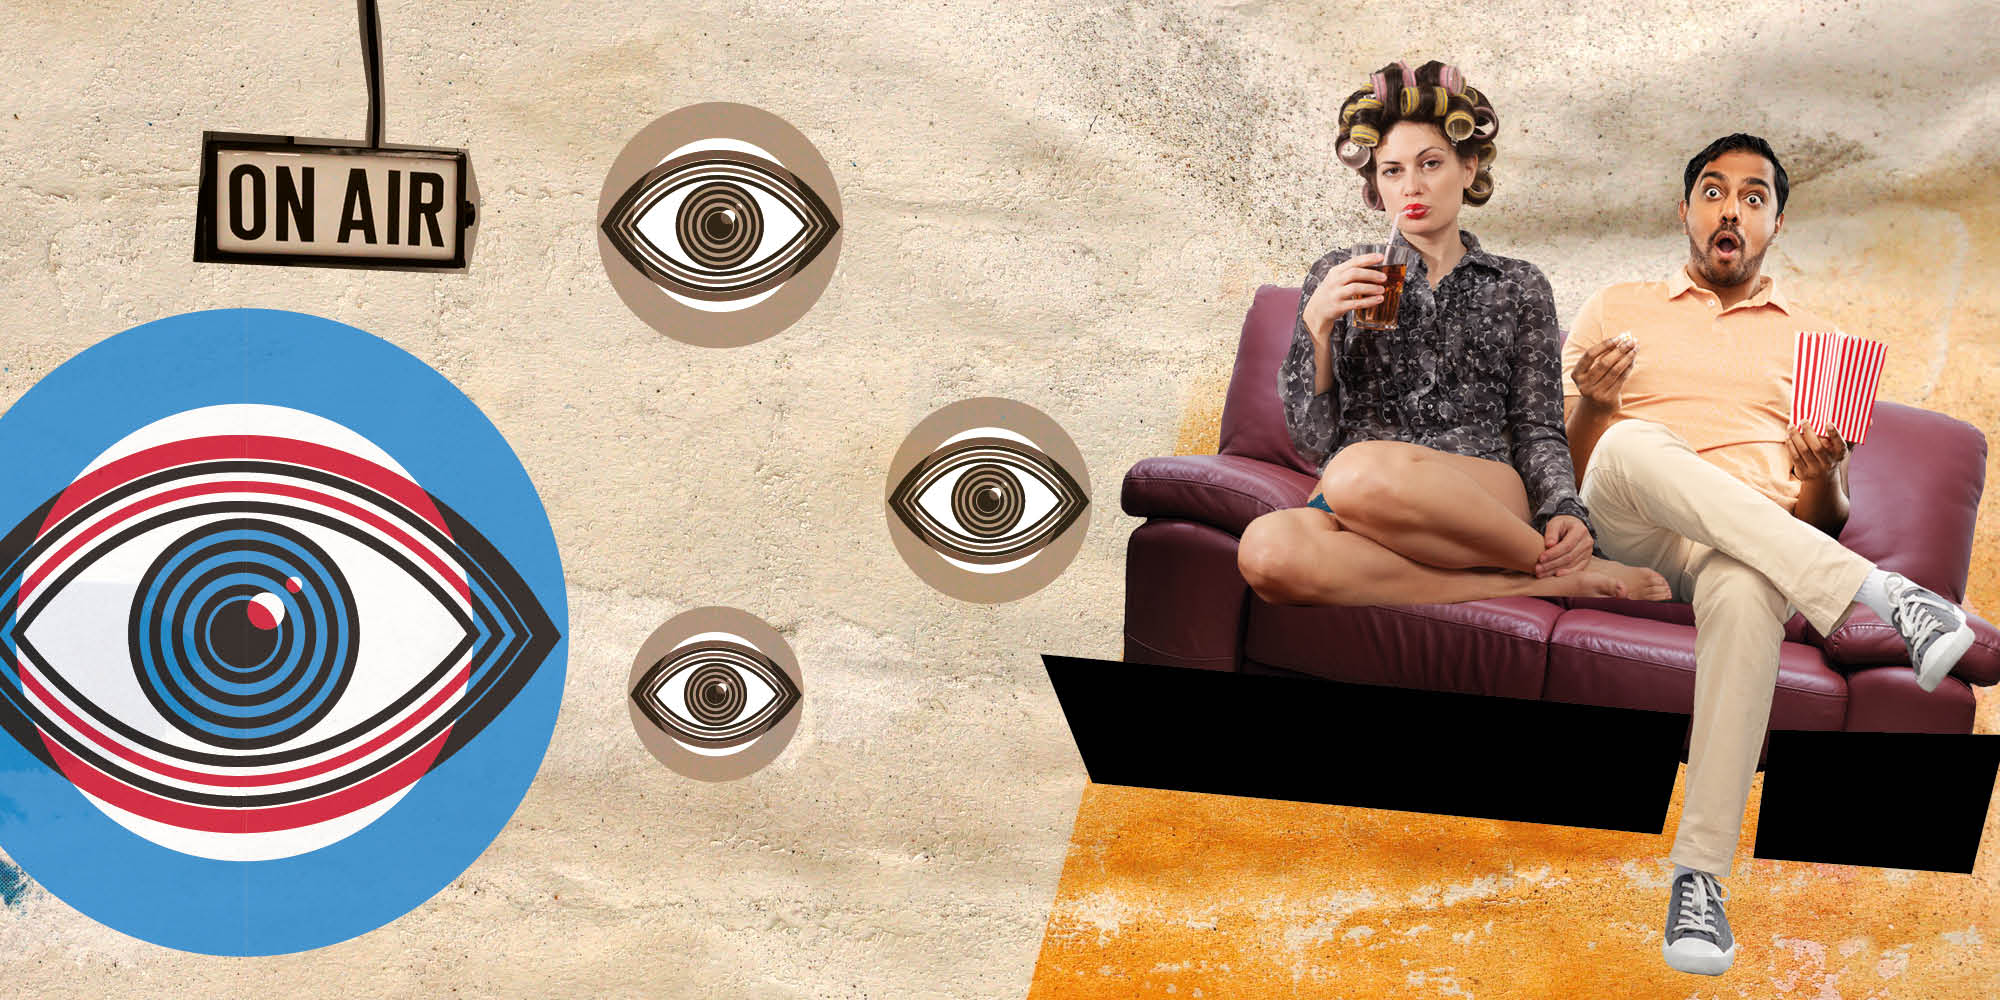 Collage featuring a woman and a man sat on a sofa. The woman has curlers in her hair and is sipping a drink from a straw. The man looks surprised and is eating popcorn. There are cartoon eyes and an On Air sign.